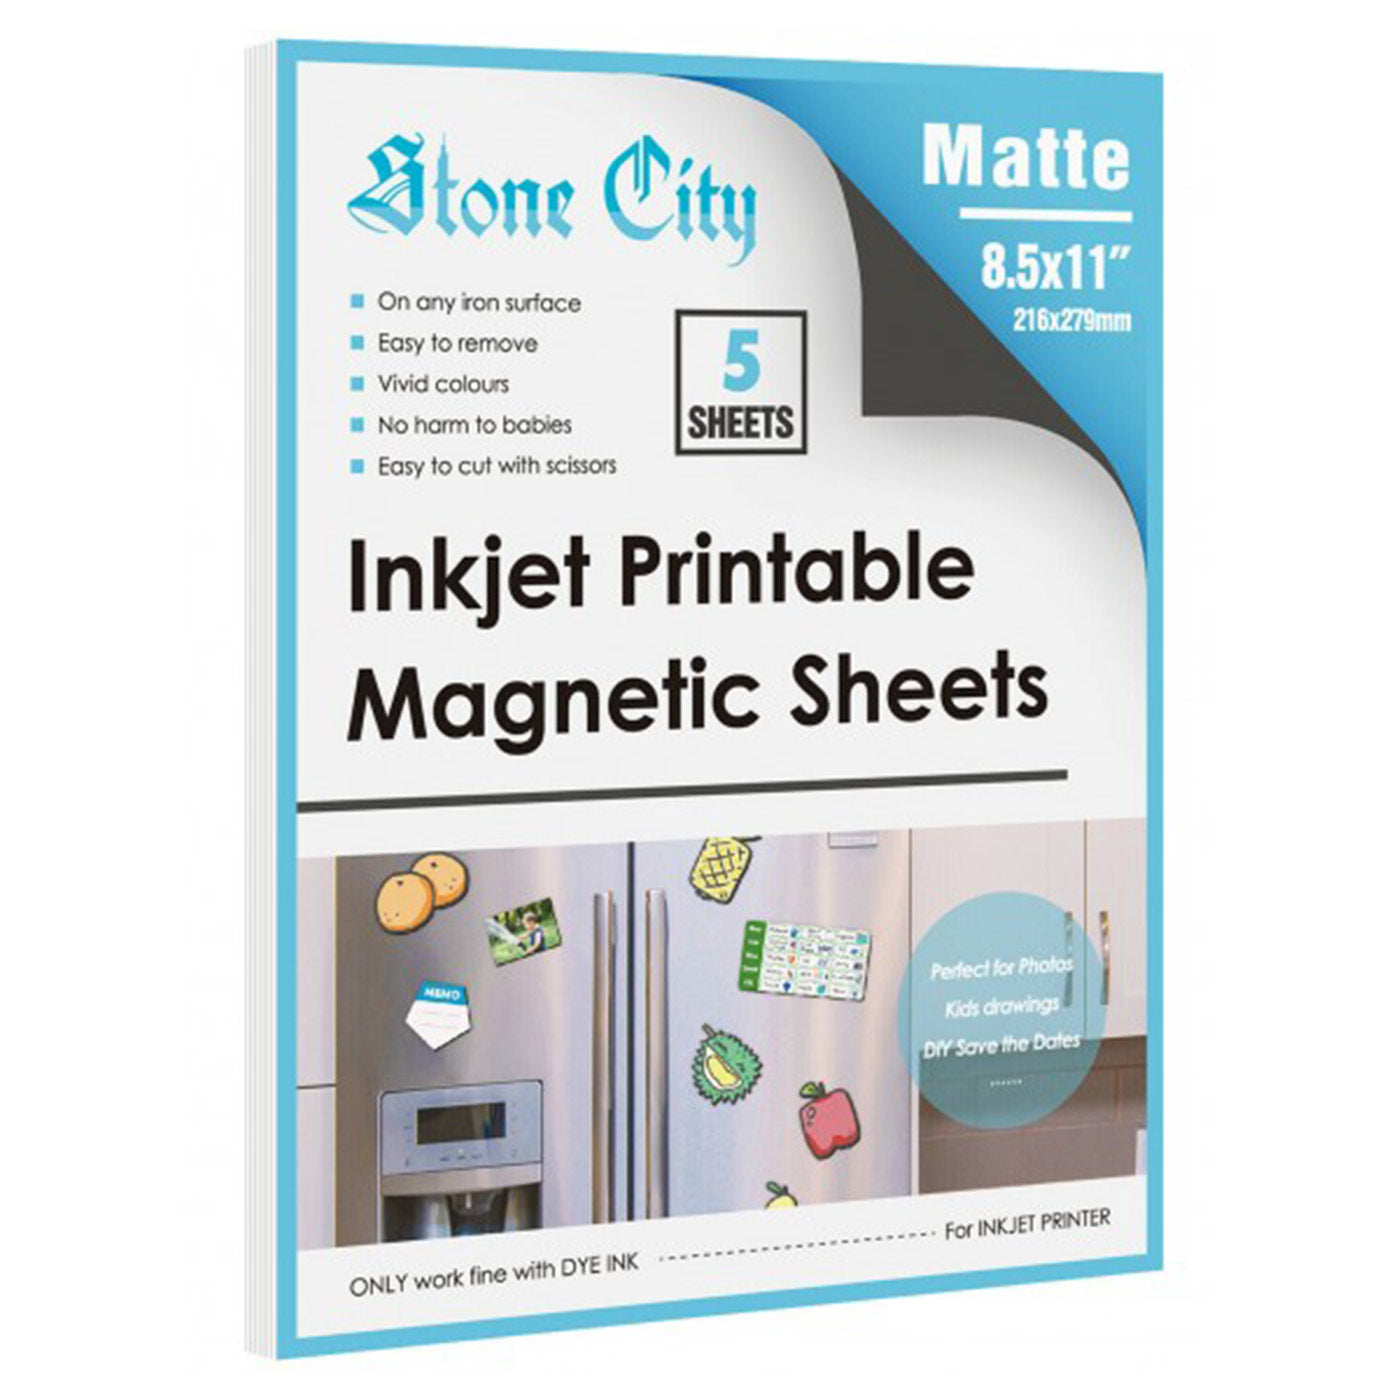 Flexible Magnets Self Adhesive Magnetic Sheets - Make Anything a Magnet -  Magnetic Adhesive Sheets -Premium Quality Peel and Stick Magnets 20 mil  (Many Packs & Sizes) (8.5 x 11 (inches), 1)